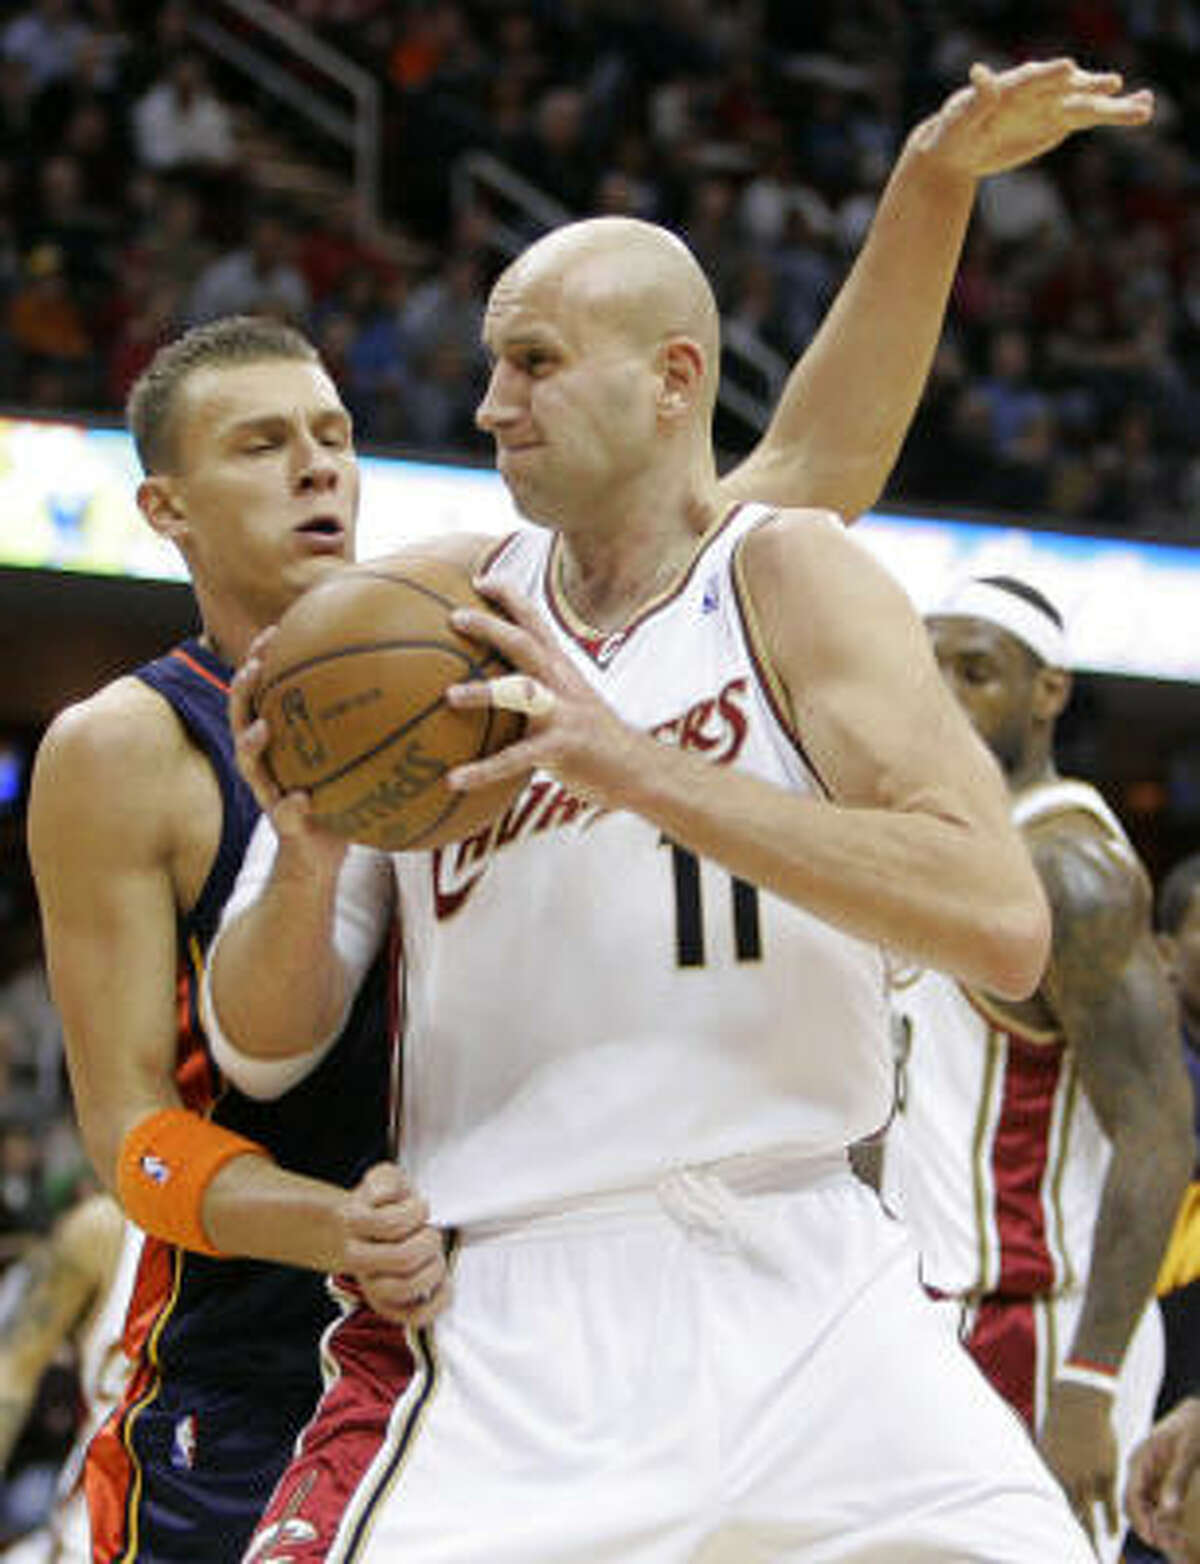 Cleveland Cavaliers center Zydrunas Ilgauskas (11) became the team’s all-time rebounding leader, moving past Brad Daugherty for first on the list.